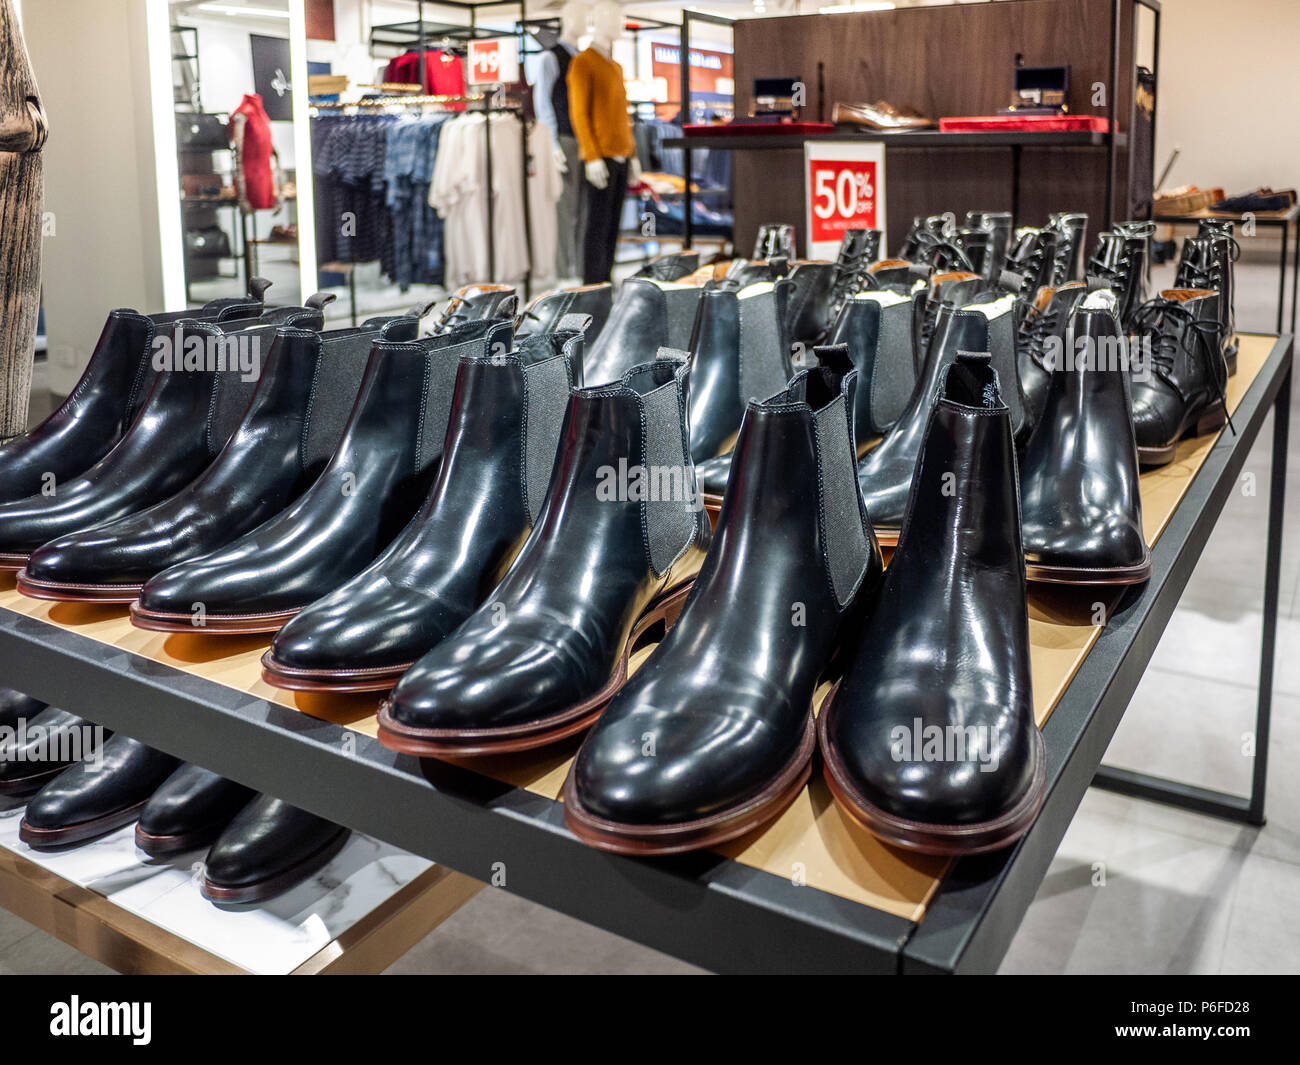 Men's leather boots displayed in 